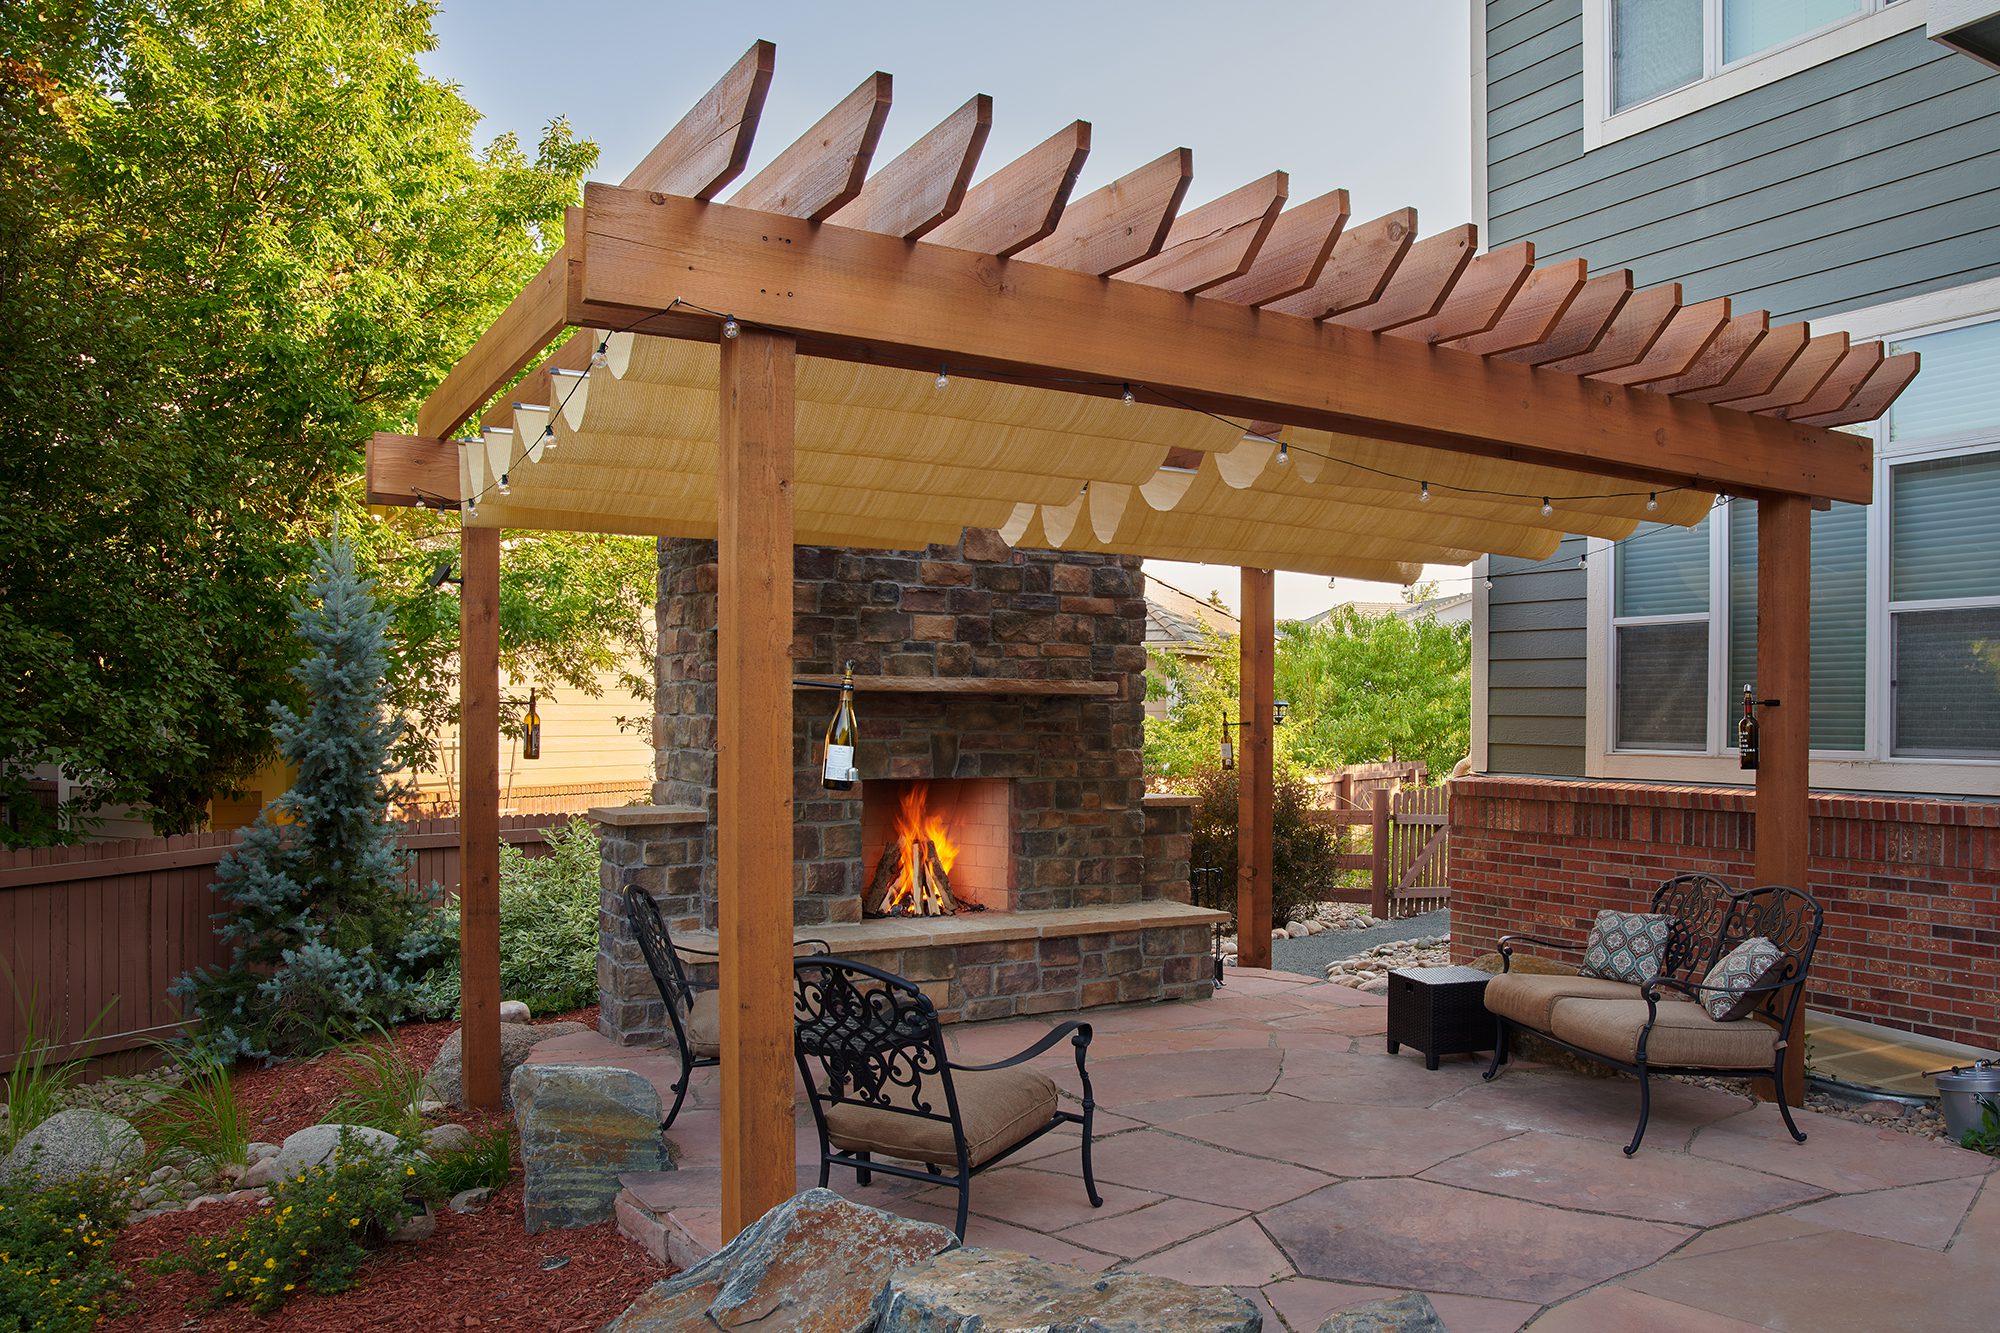 Pergola and outdoor fireplace with expert masonry work in Highlands Ranch, CO